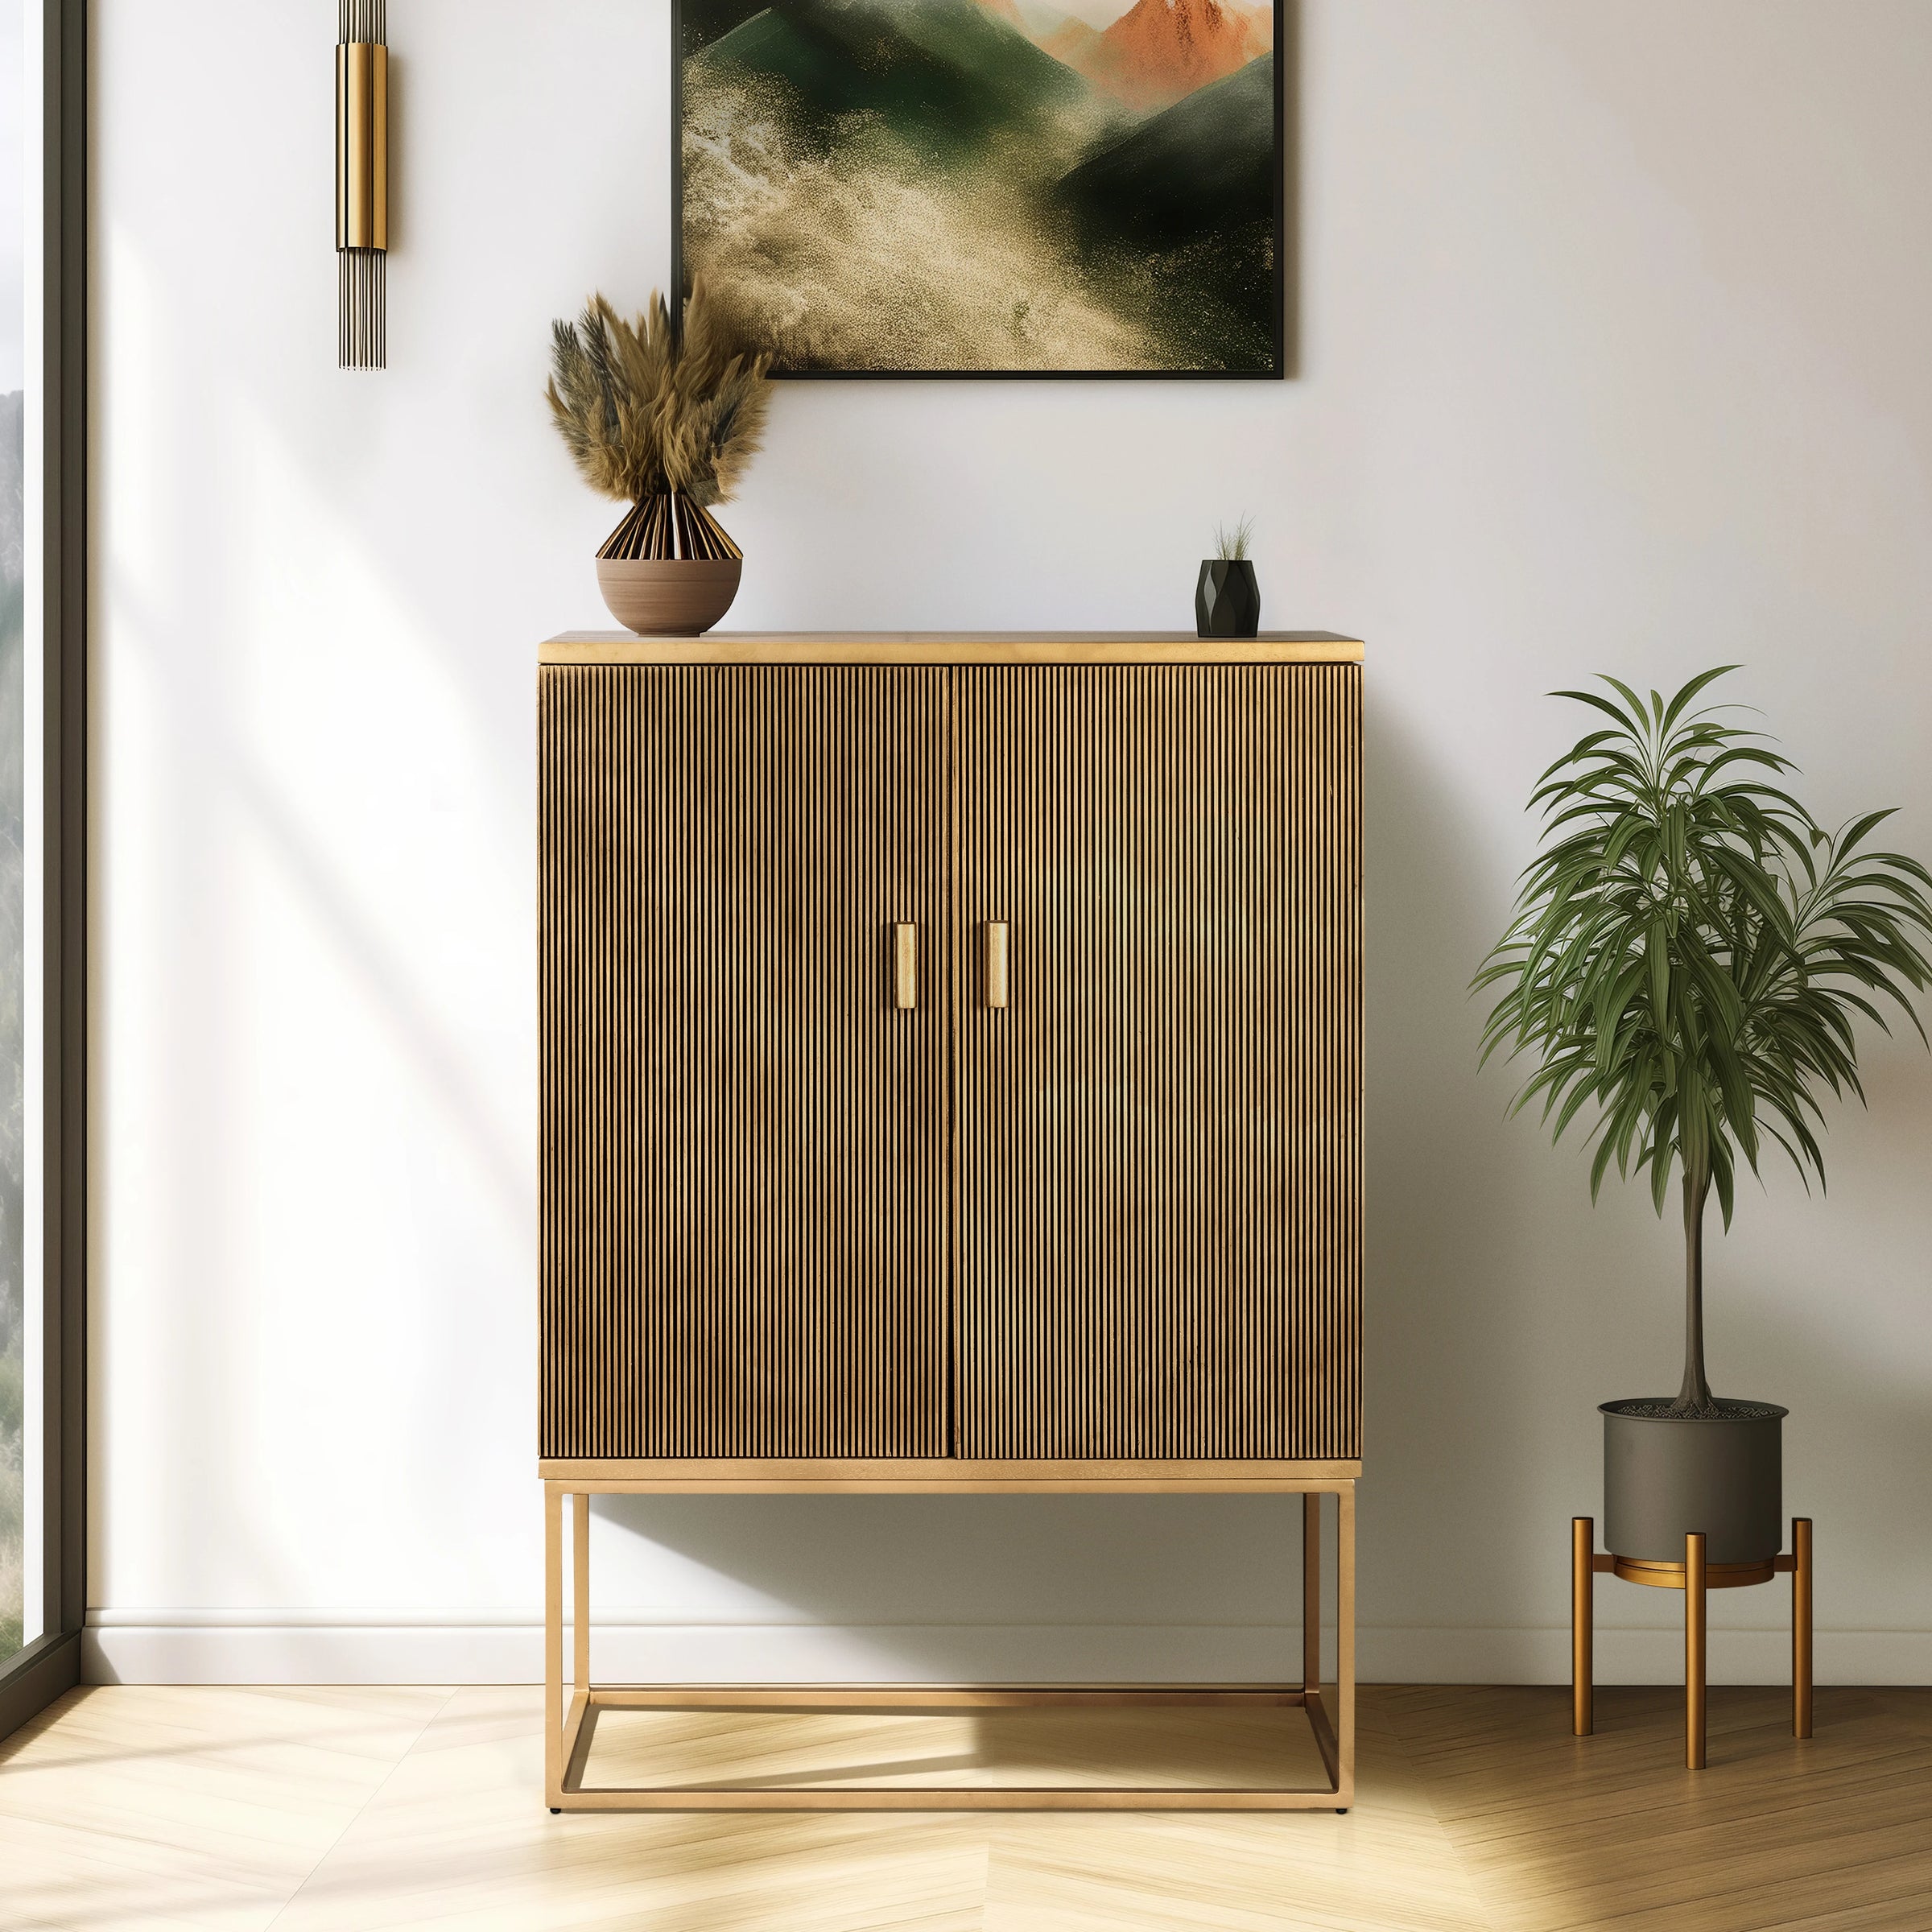 Natural Mango Accent Cabinet In Open Room With Back Wall Shelf With Decor Items